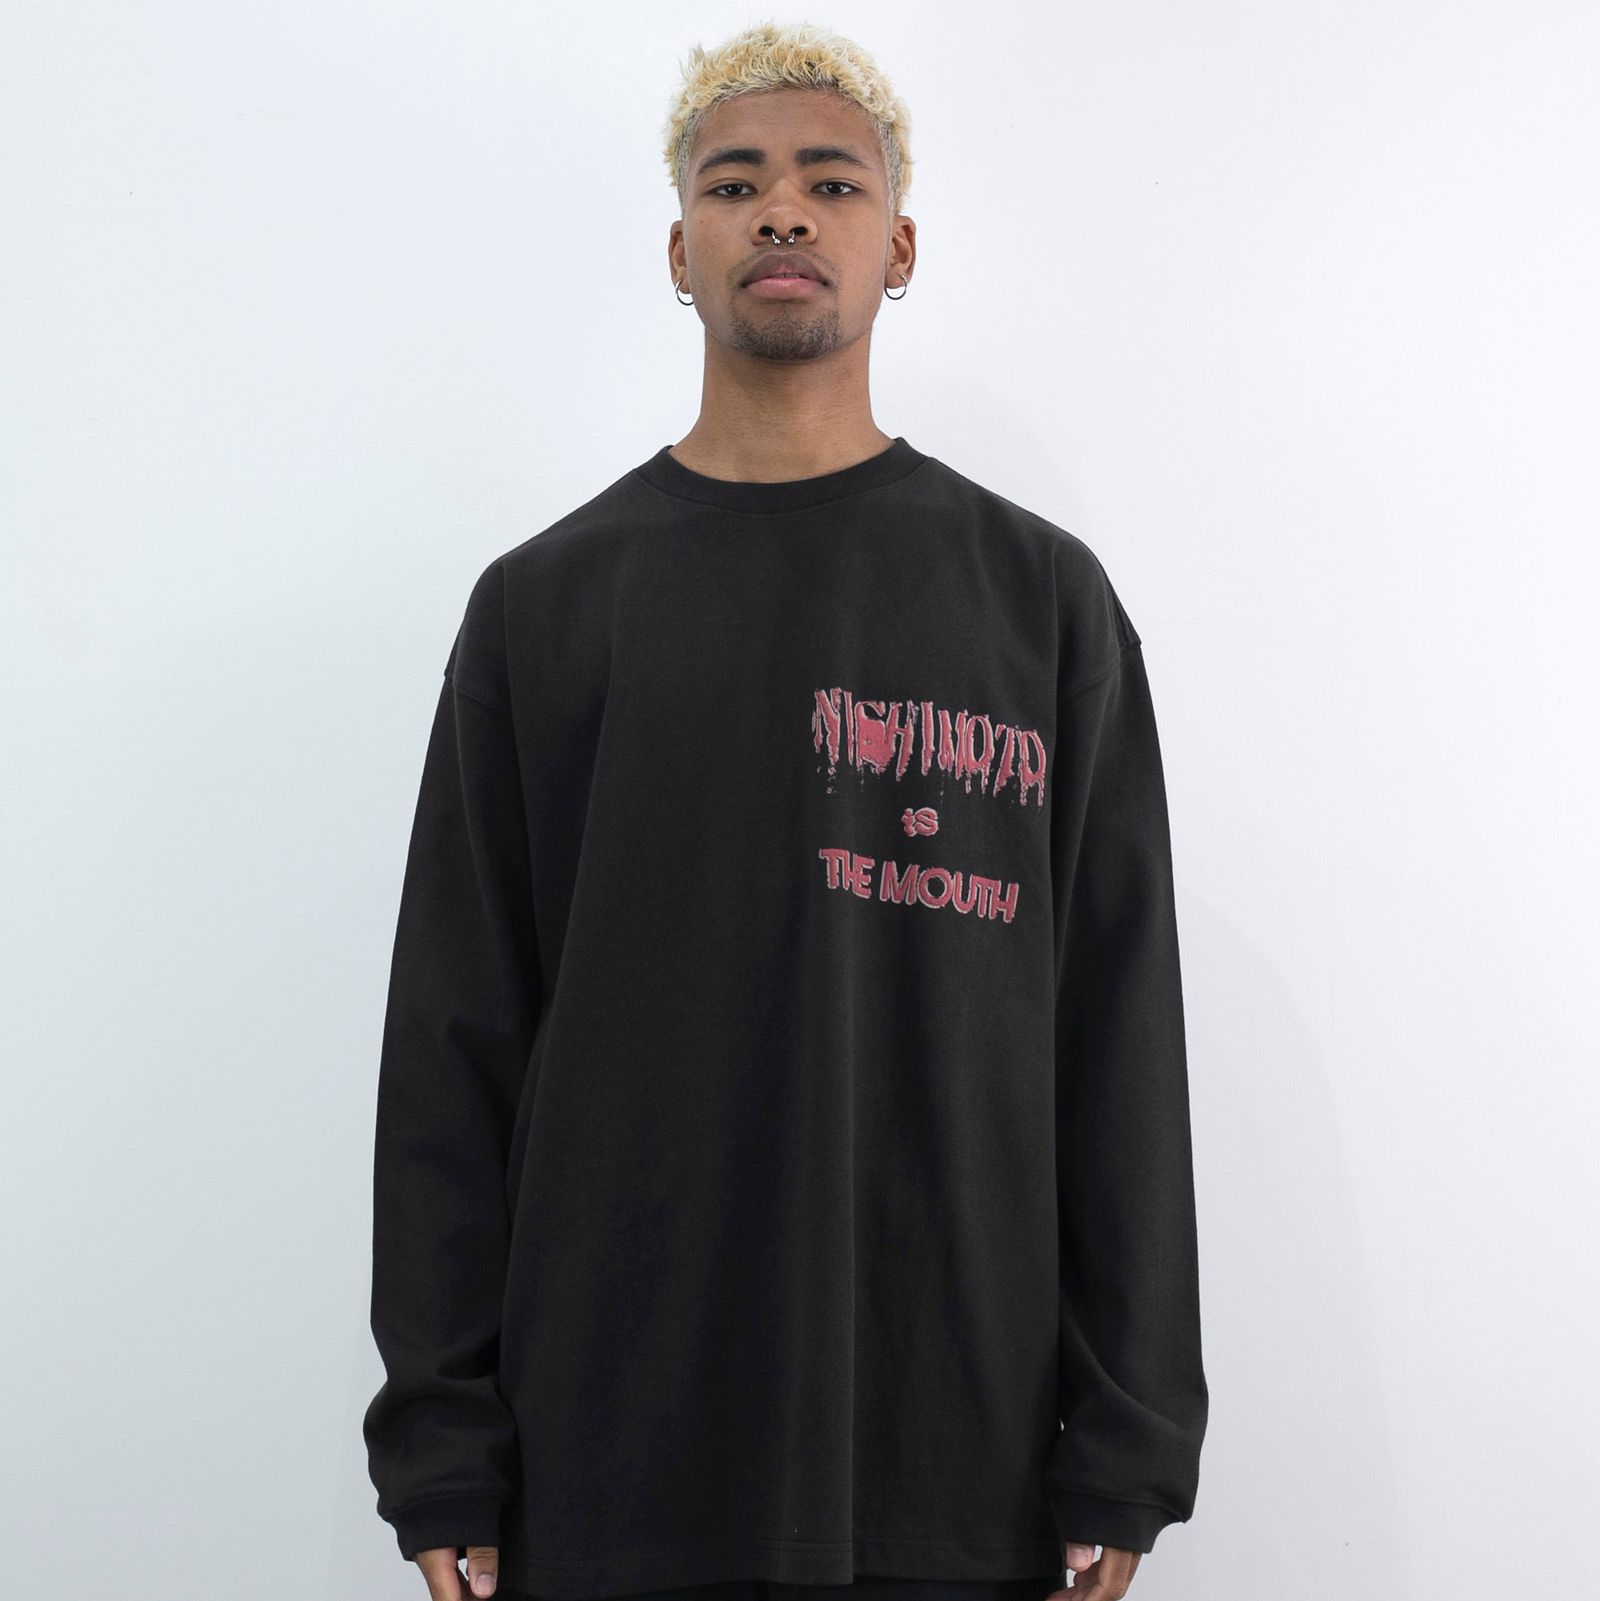 NISHIMOTO IS THE MOUTH - 【残りわずか】JKR L/S Tee | ACRMTSM